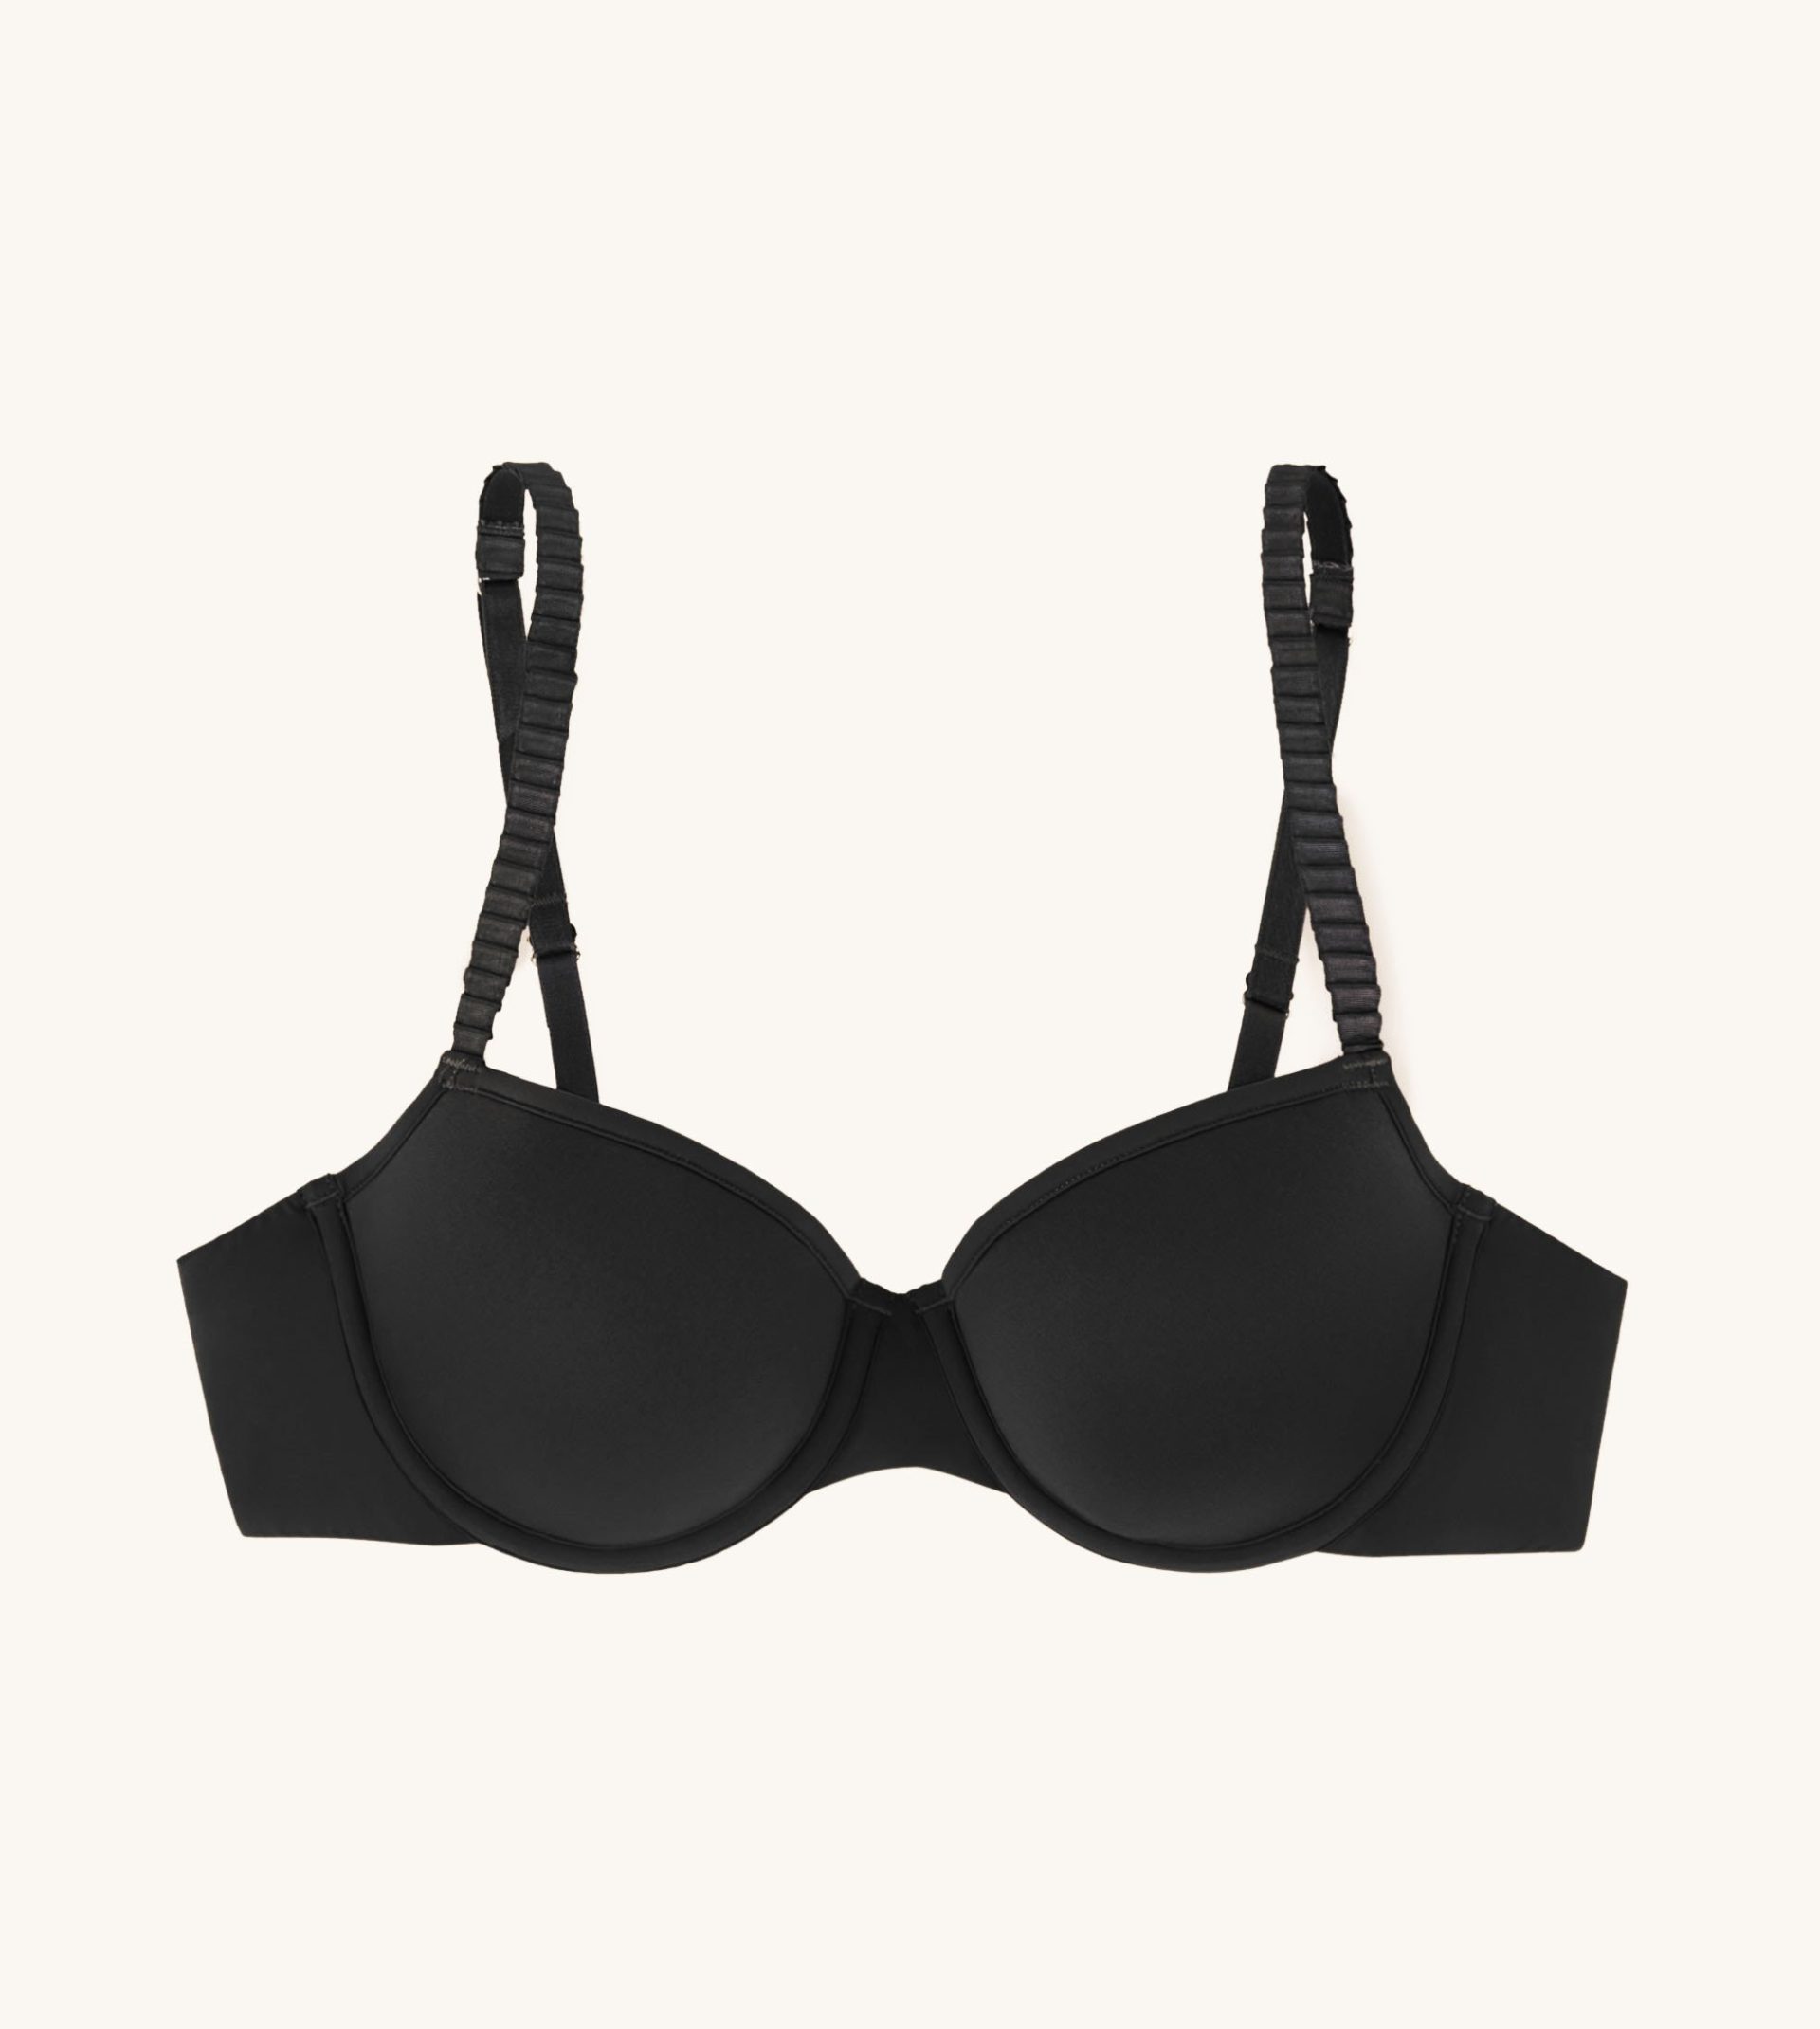 'Thirdlove Bras Are The Truth' And More Revelations From A Conversation Turned Raving Review